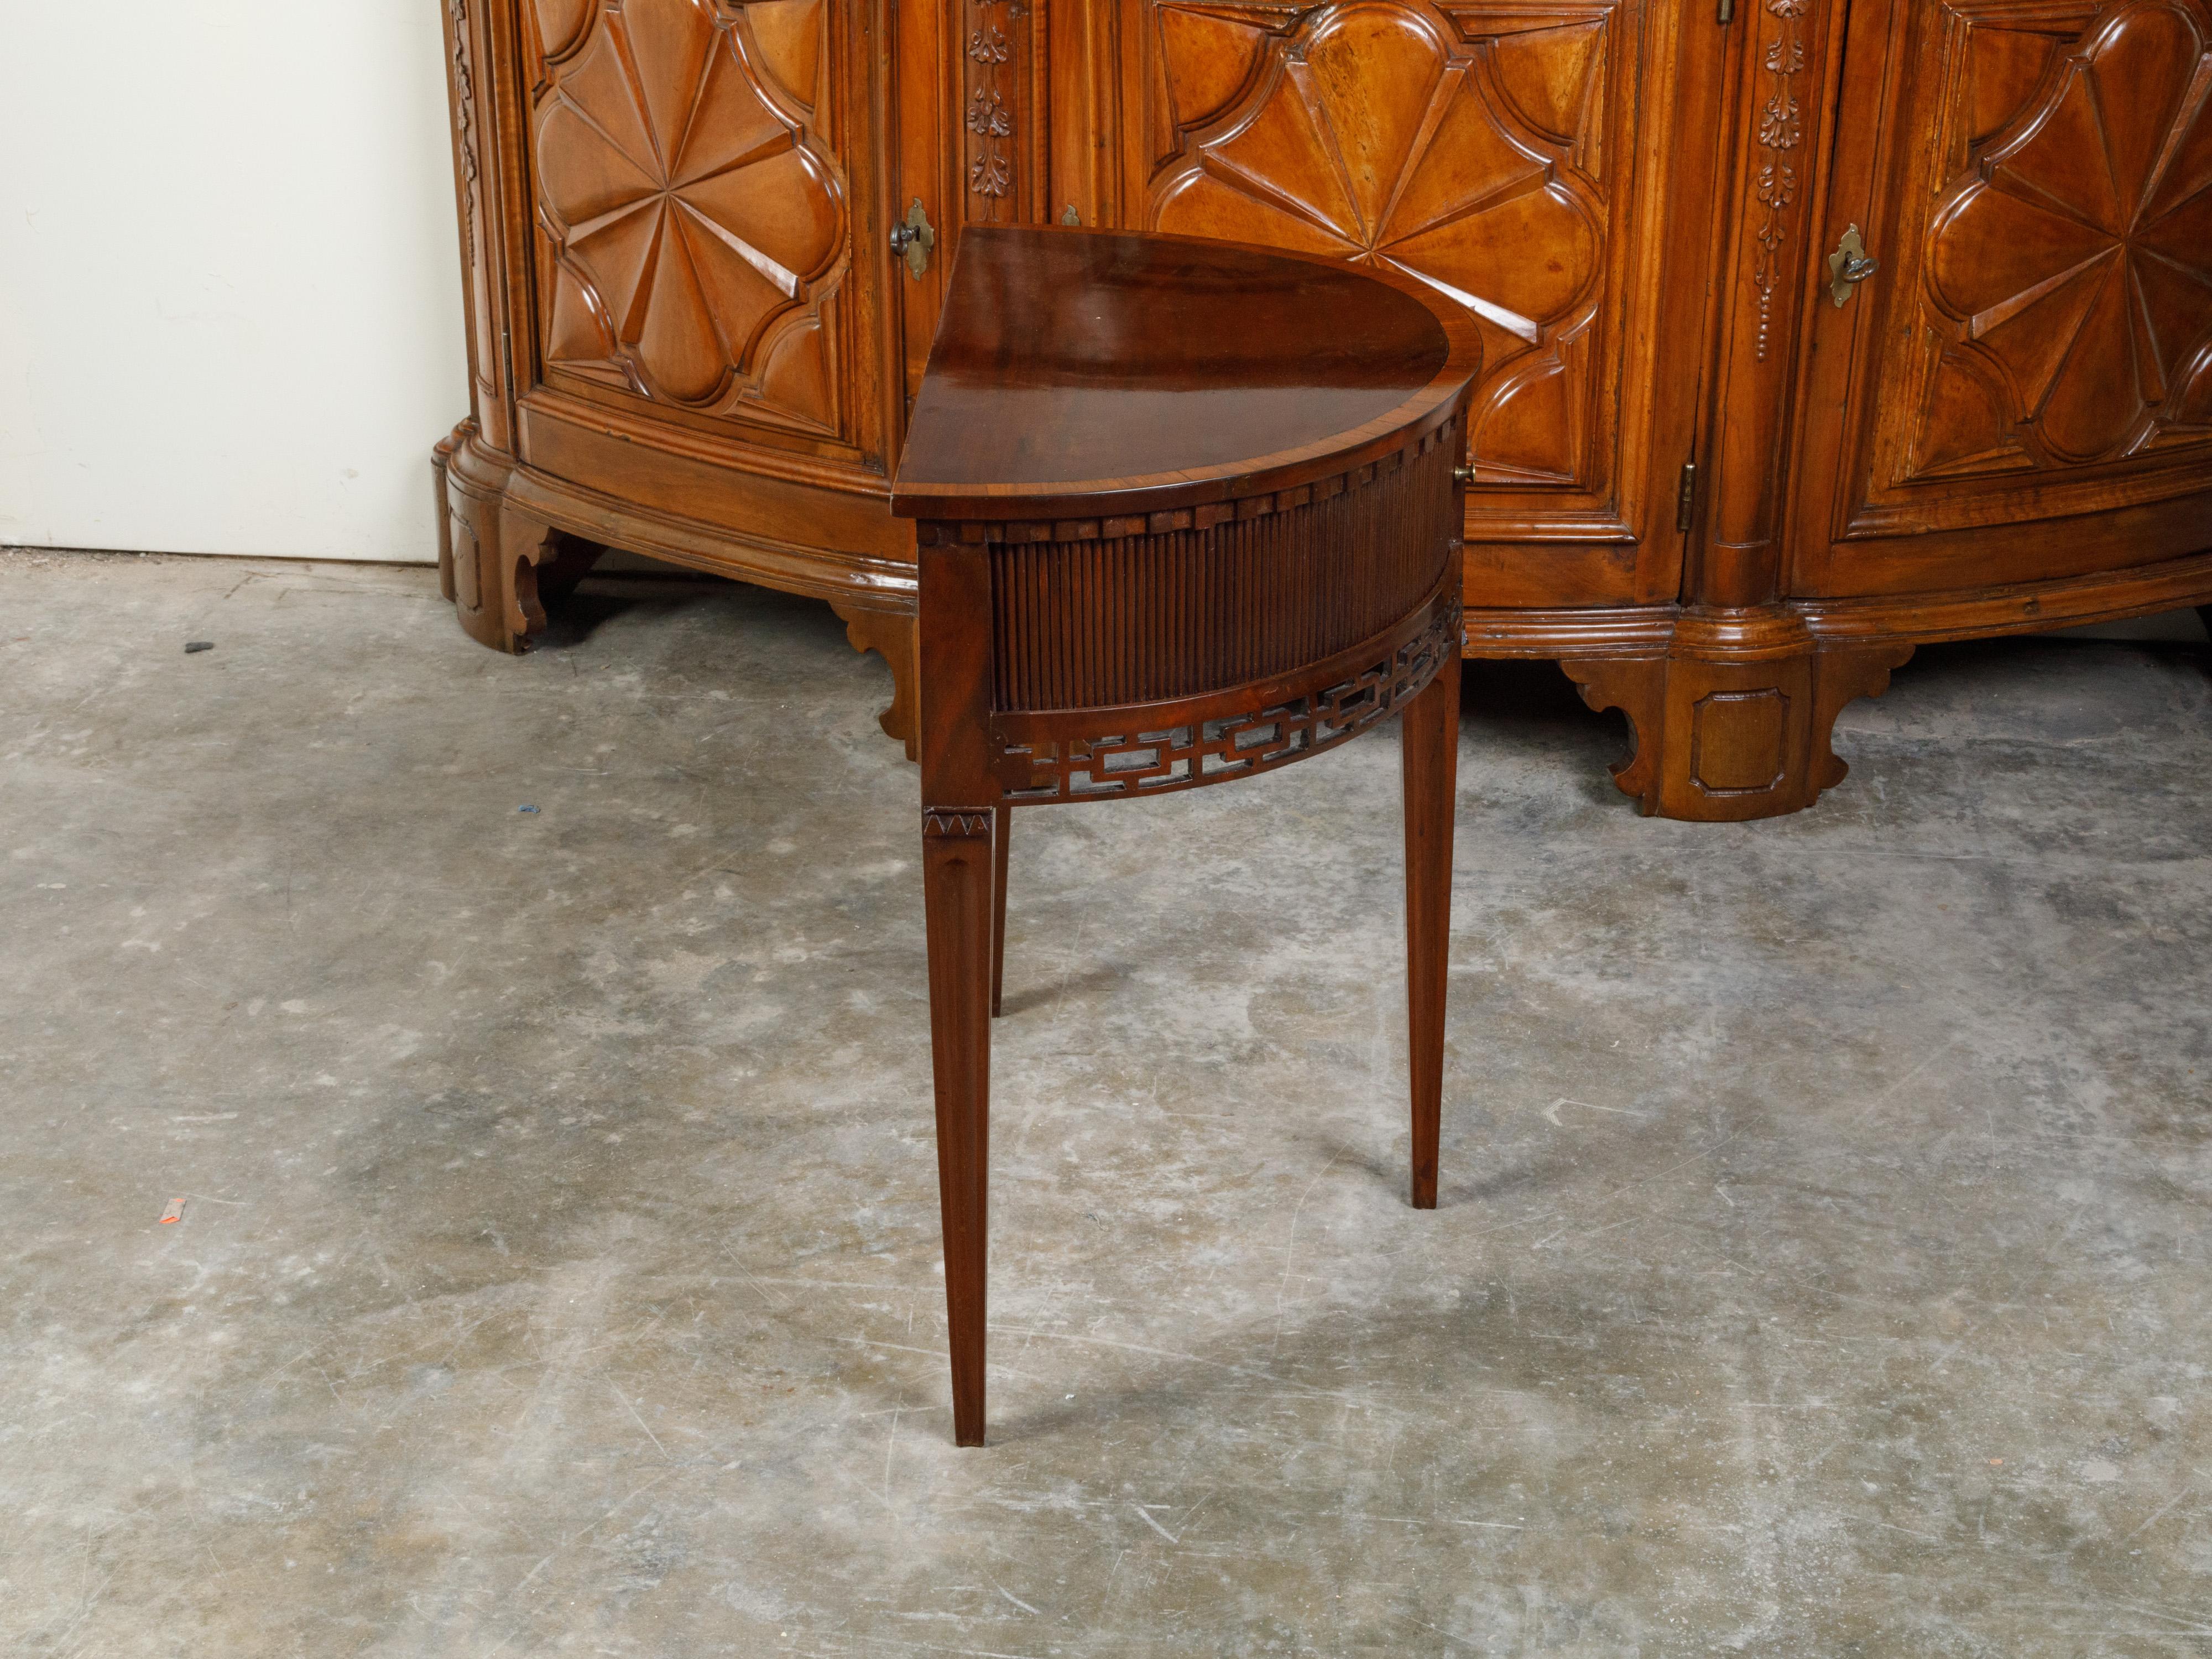 English Mahogany 19th Century Demi-Lune Console Table with Tambour Sliding Doors For Sale 7